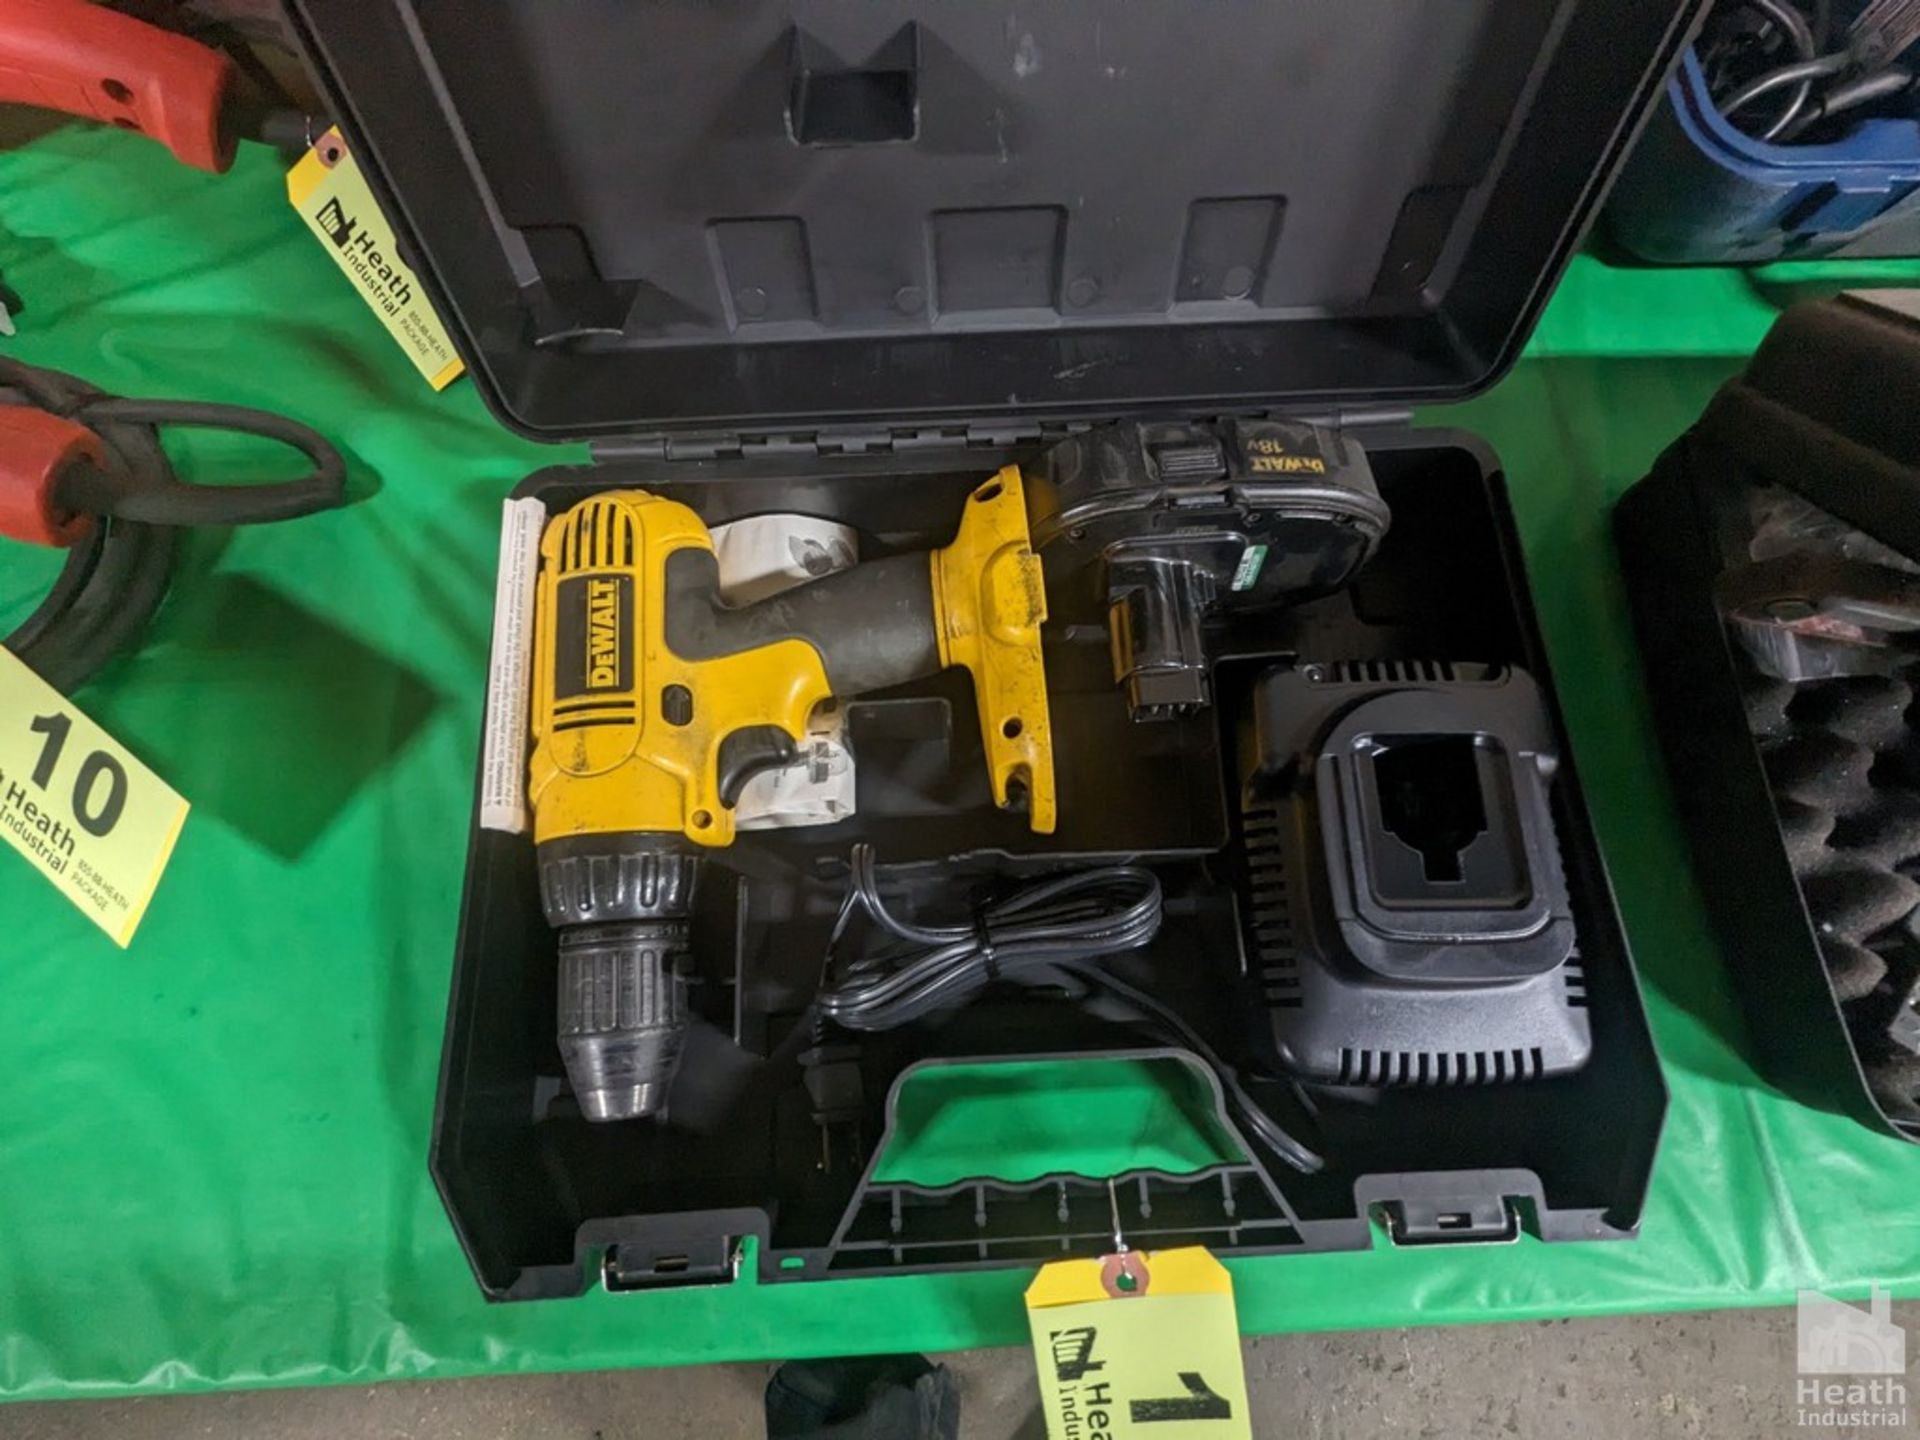 DEWALT DC970 1/2" VSR DRILL/DRIVER WITH 18V BATTERY AND CHARGER